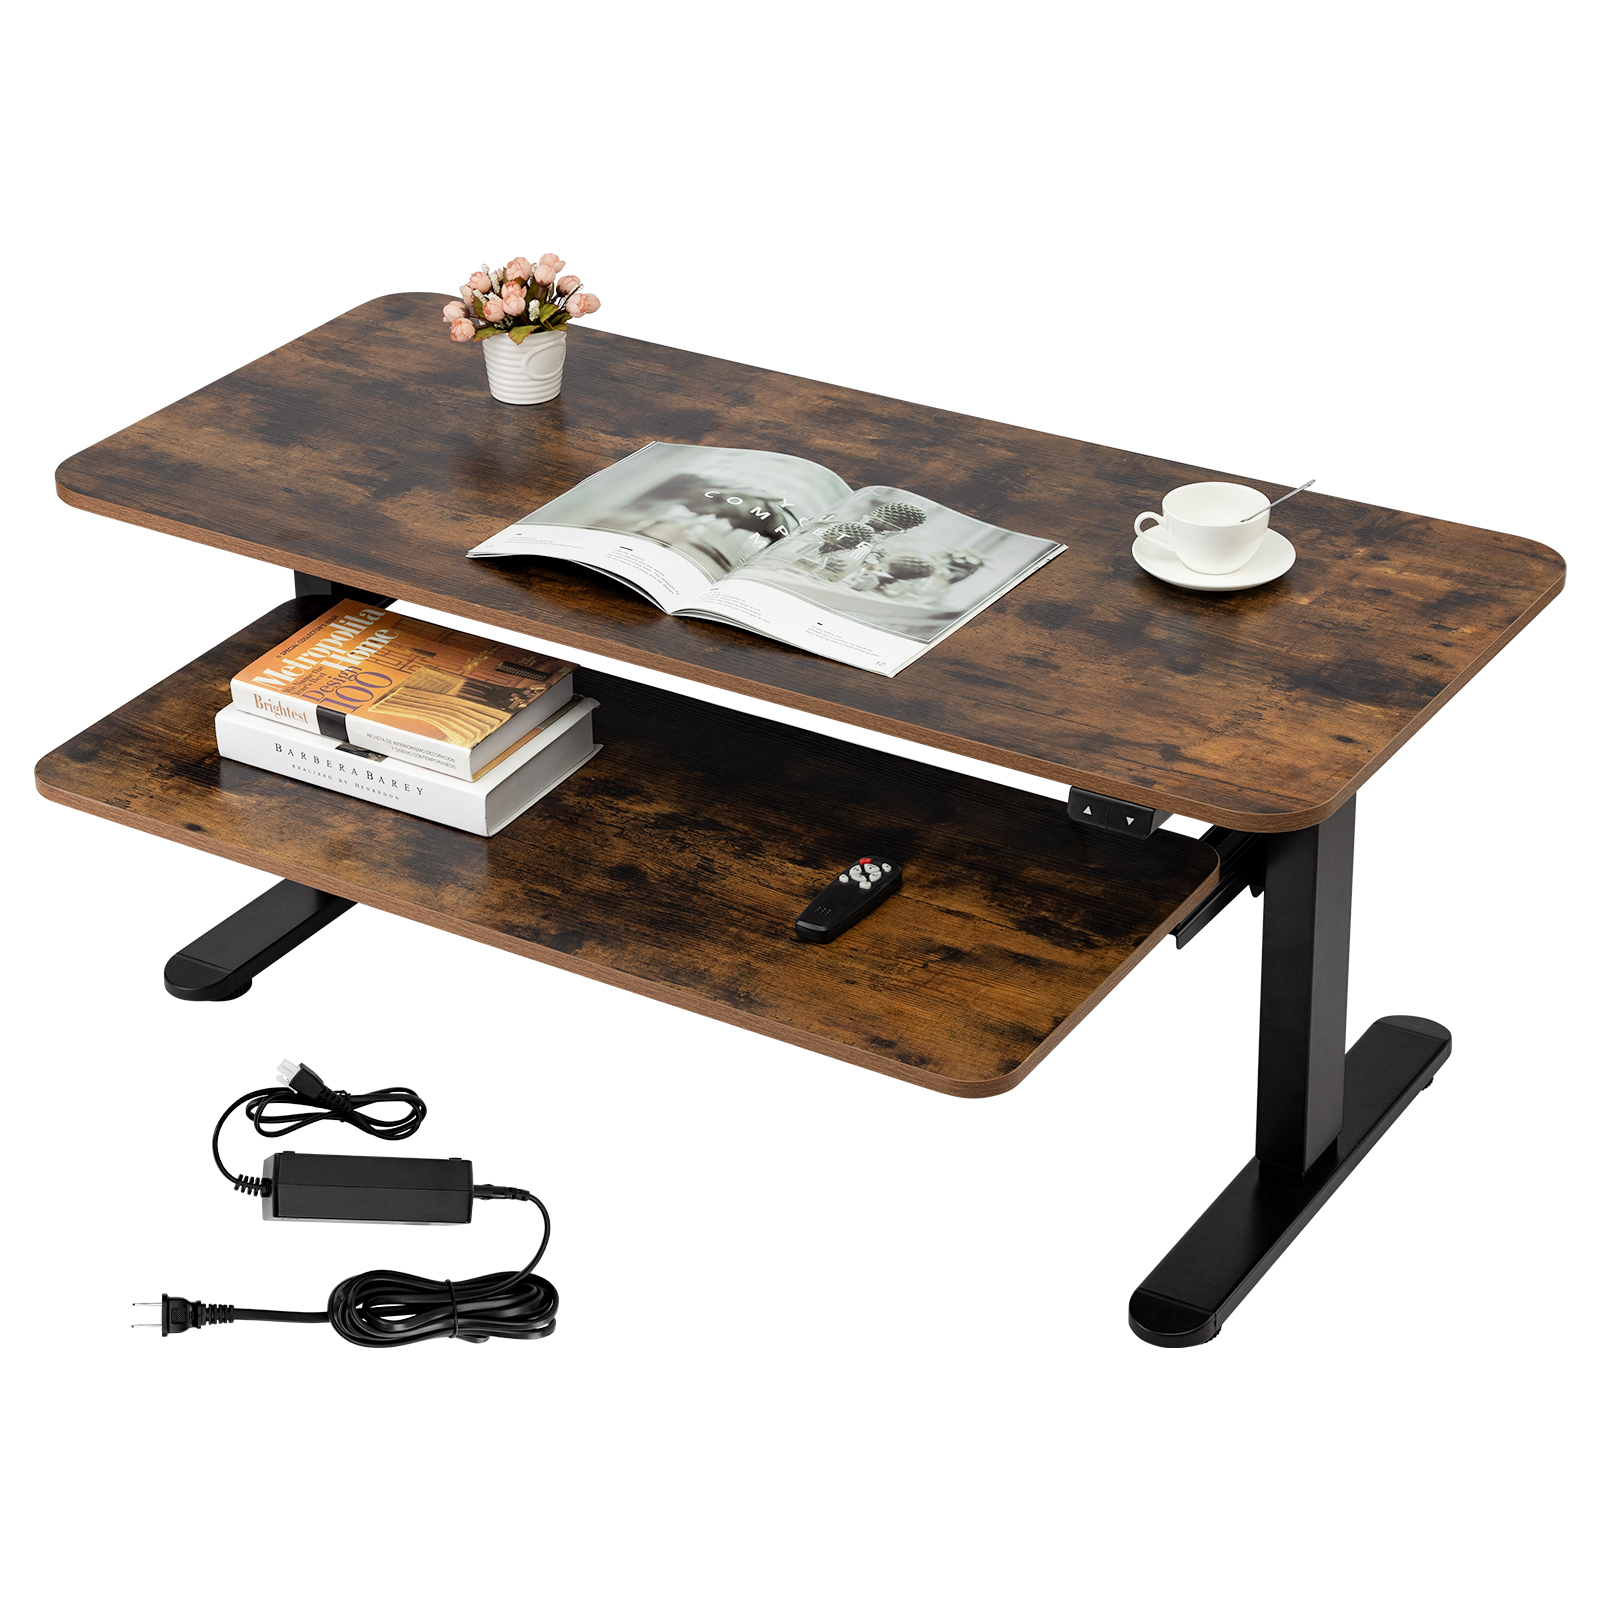 TOPSKY Electric Adjustable Coffee Table with Pull-Out Tray for Home and Office CT01.01